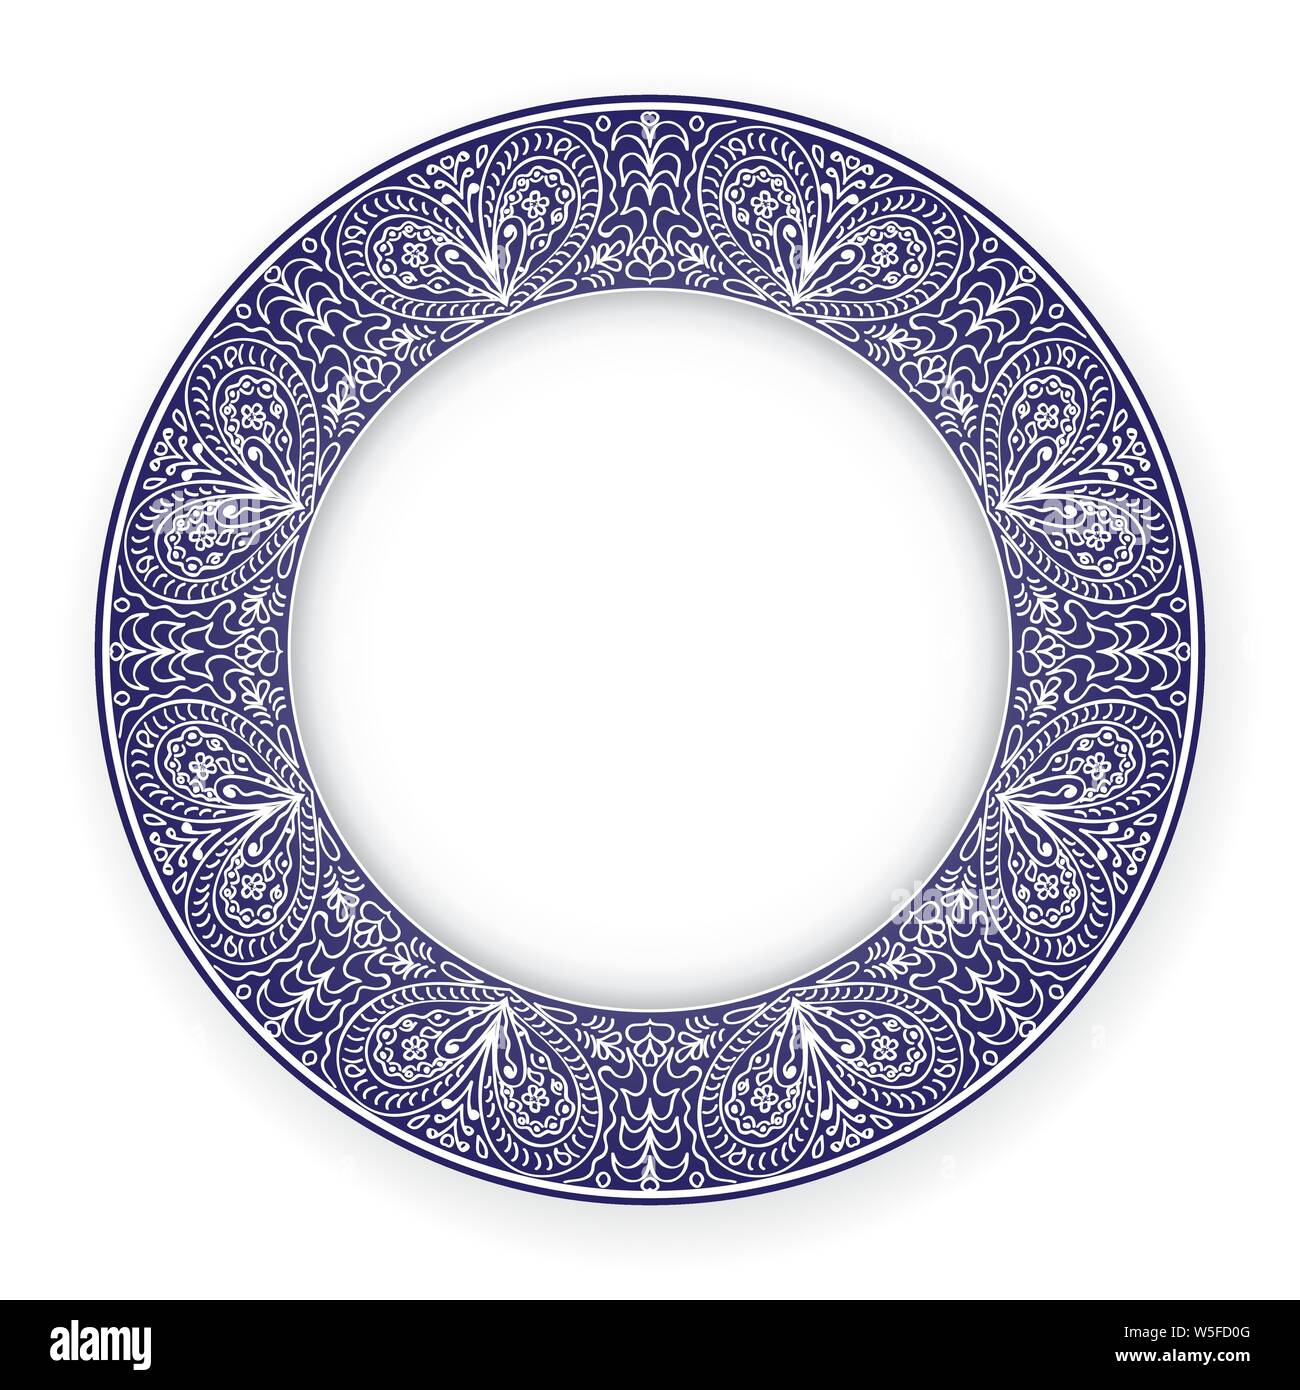 White plate with blue circular ornament. Vector illustration. Stock Vector